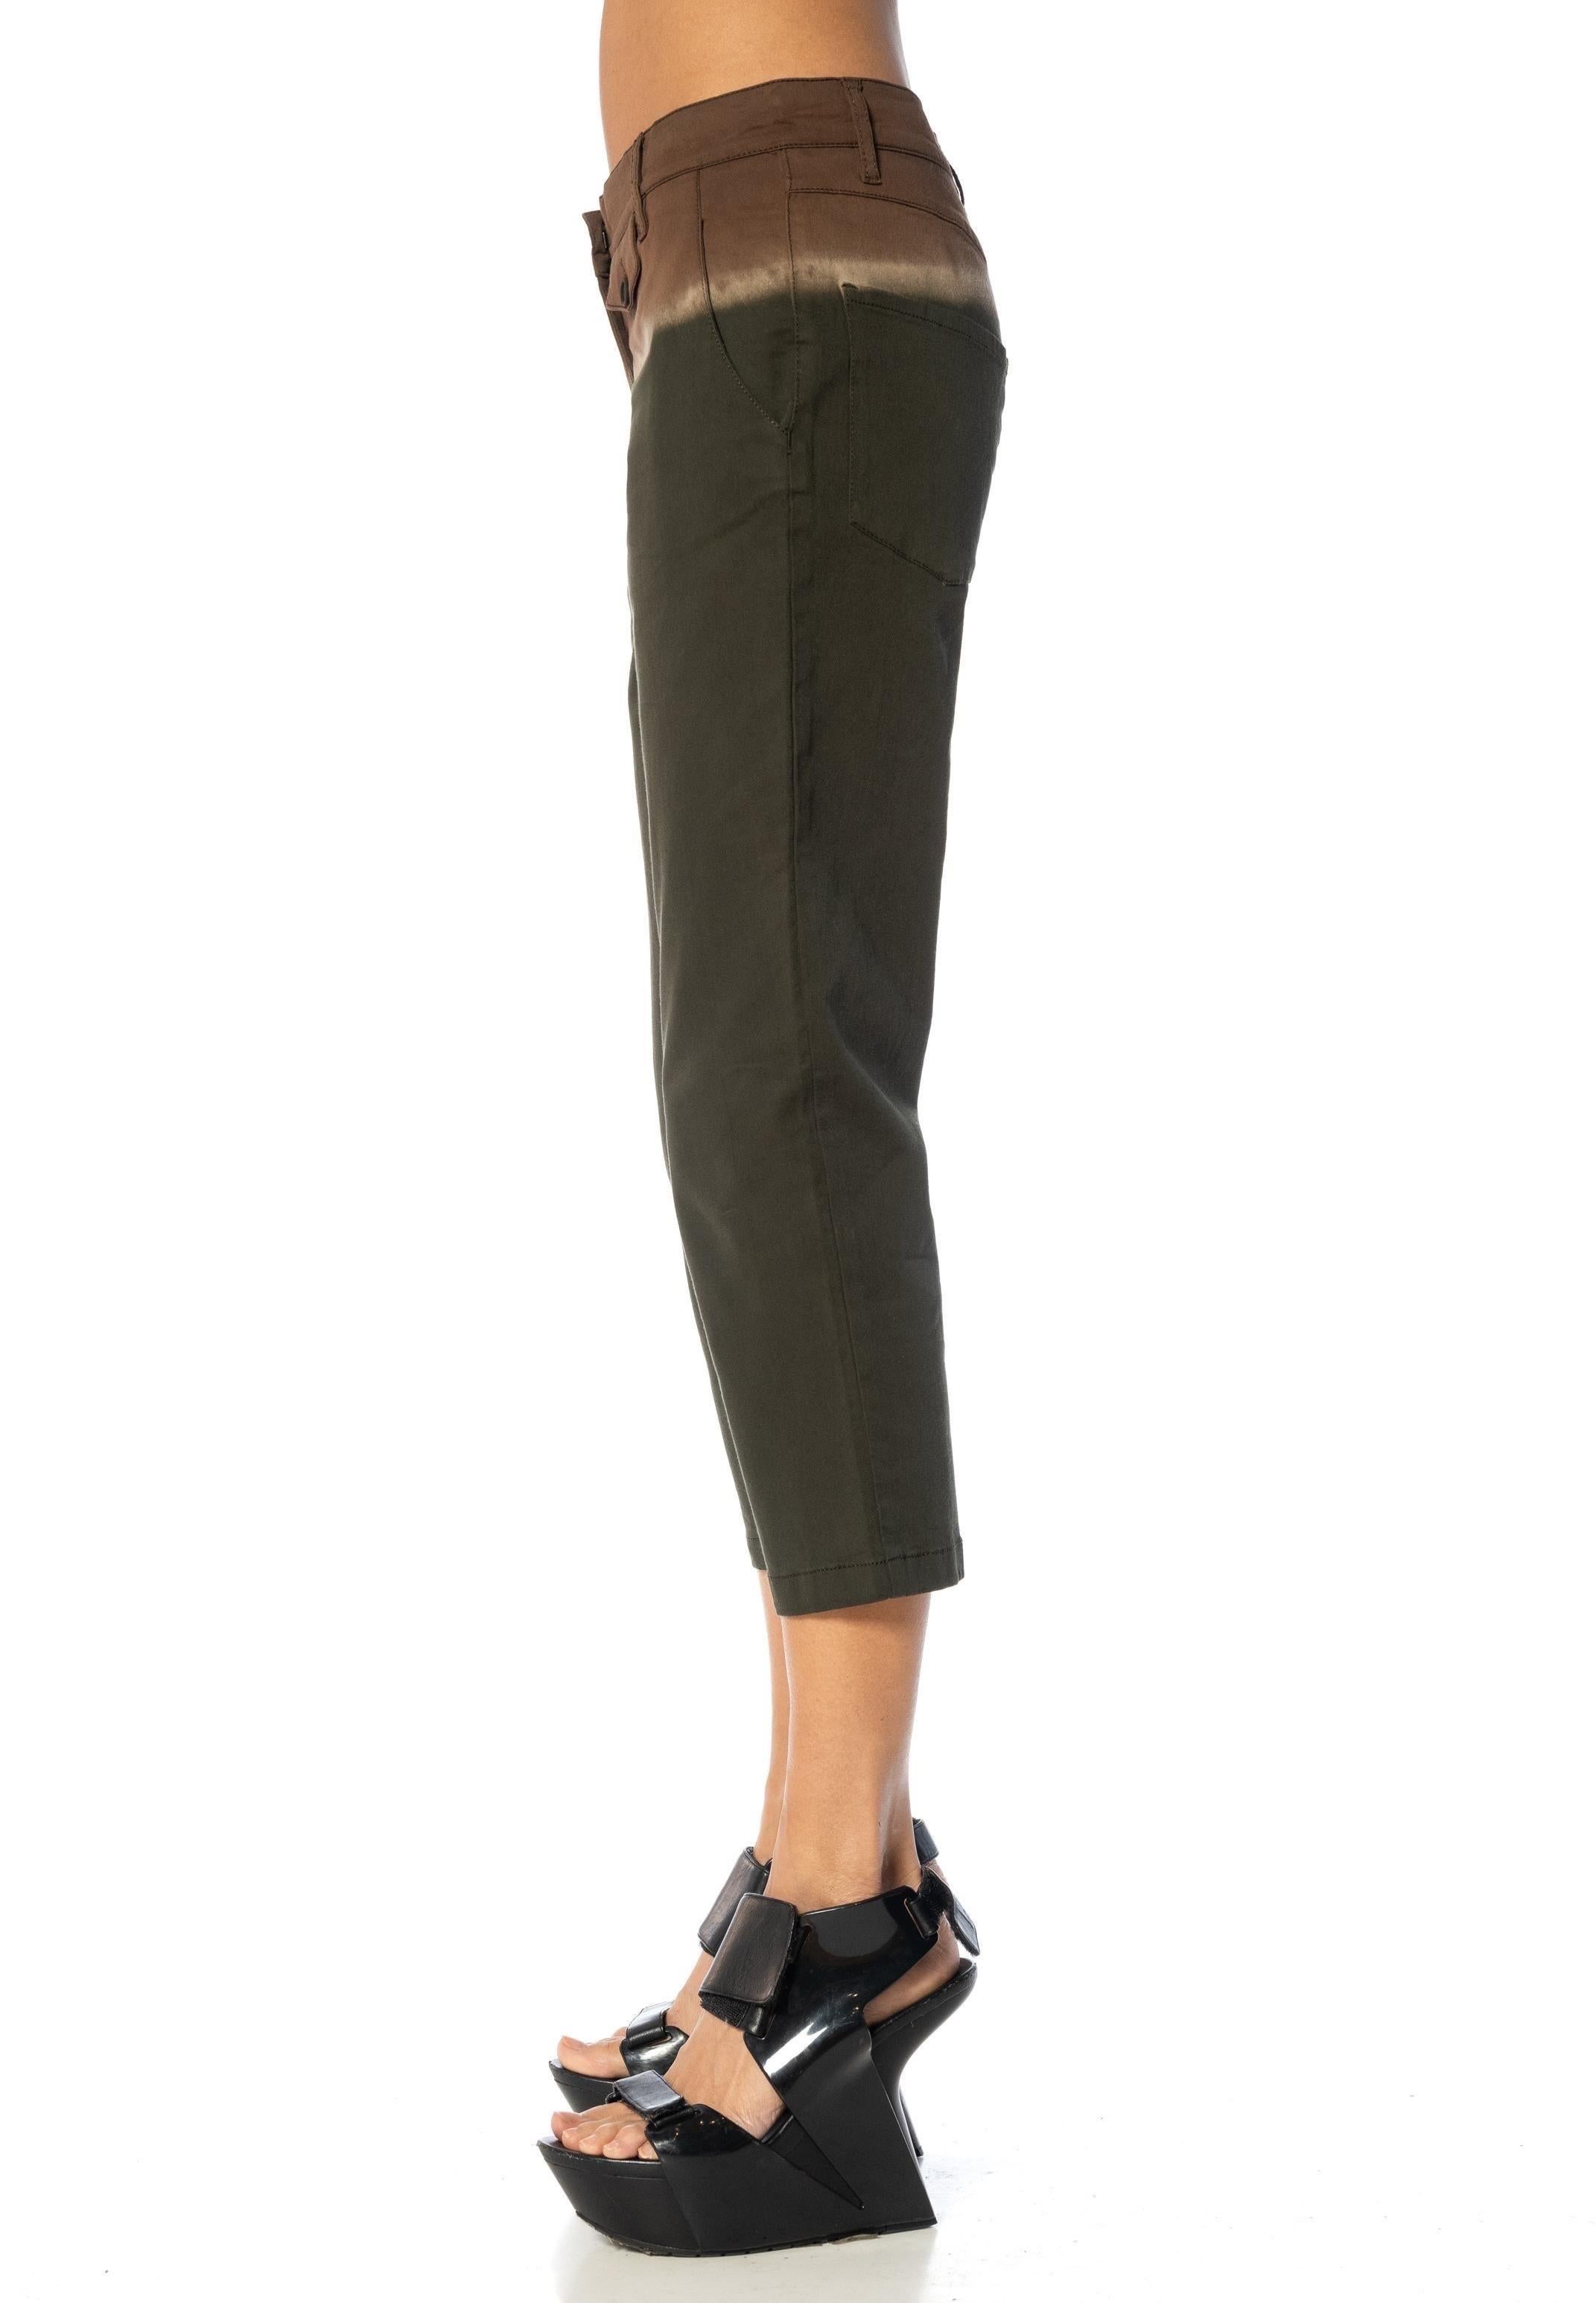 Women's 2000S PRADA Brown & Olive Green Cotton Pants For Sale